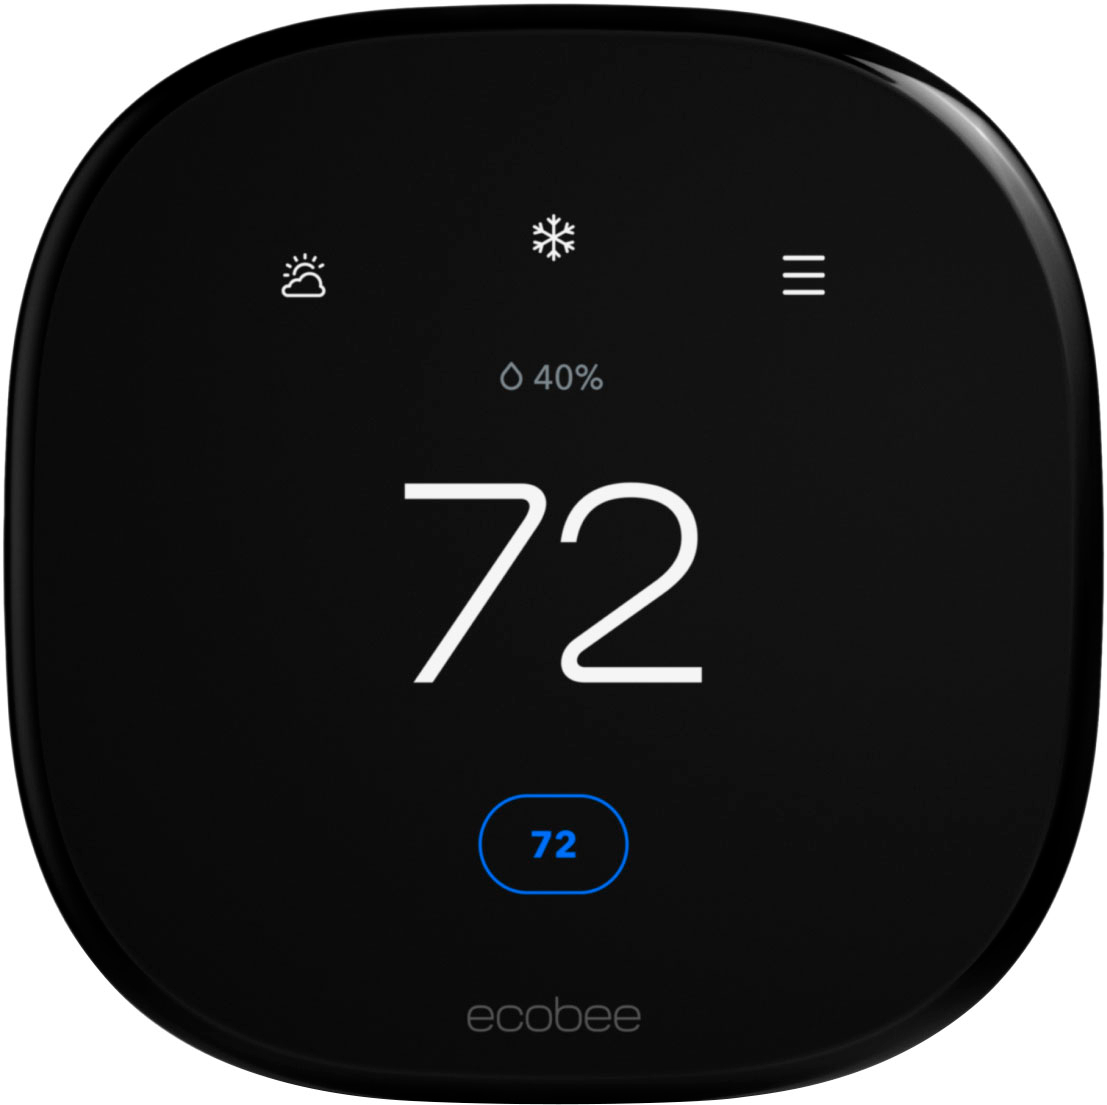 Smart Thermostats, Cameras and Sensors, Products